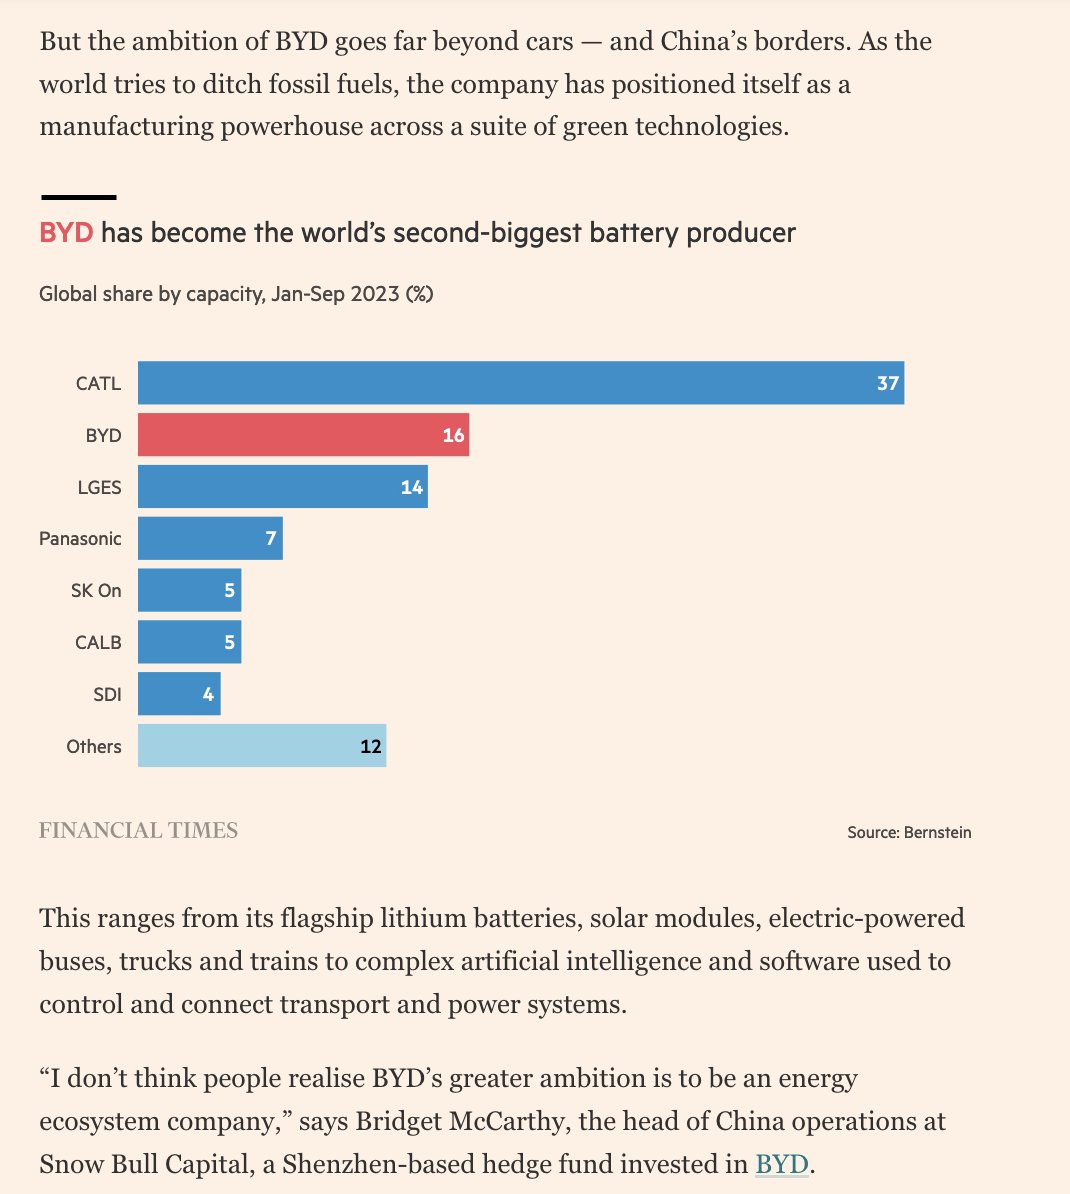 “I don’t think people realize BYD’s greater ambition is to be an energy ecosystem company,” says @bridgemccarthy_, the head of China operations at @snowbullcapital, a Shenzhen-based hedge fund invested in @BYDCompany.'
🔋🔋🔋
#alwaysbecharging 

✍️ By @edwardwhitenz